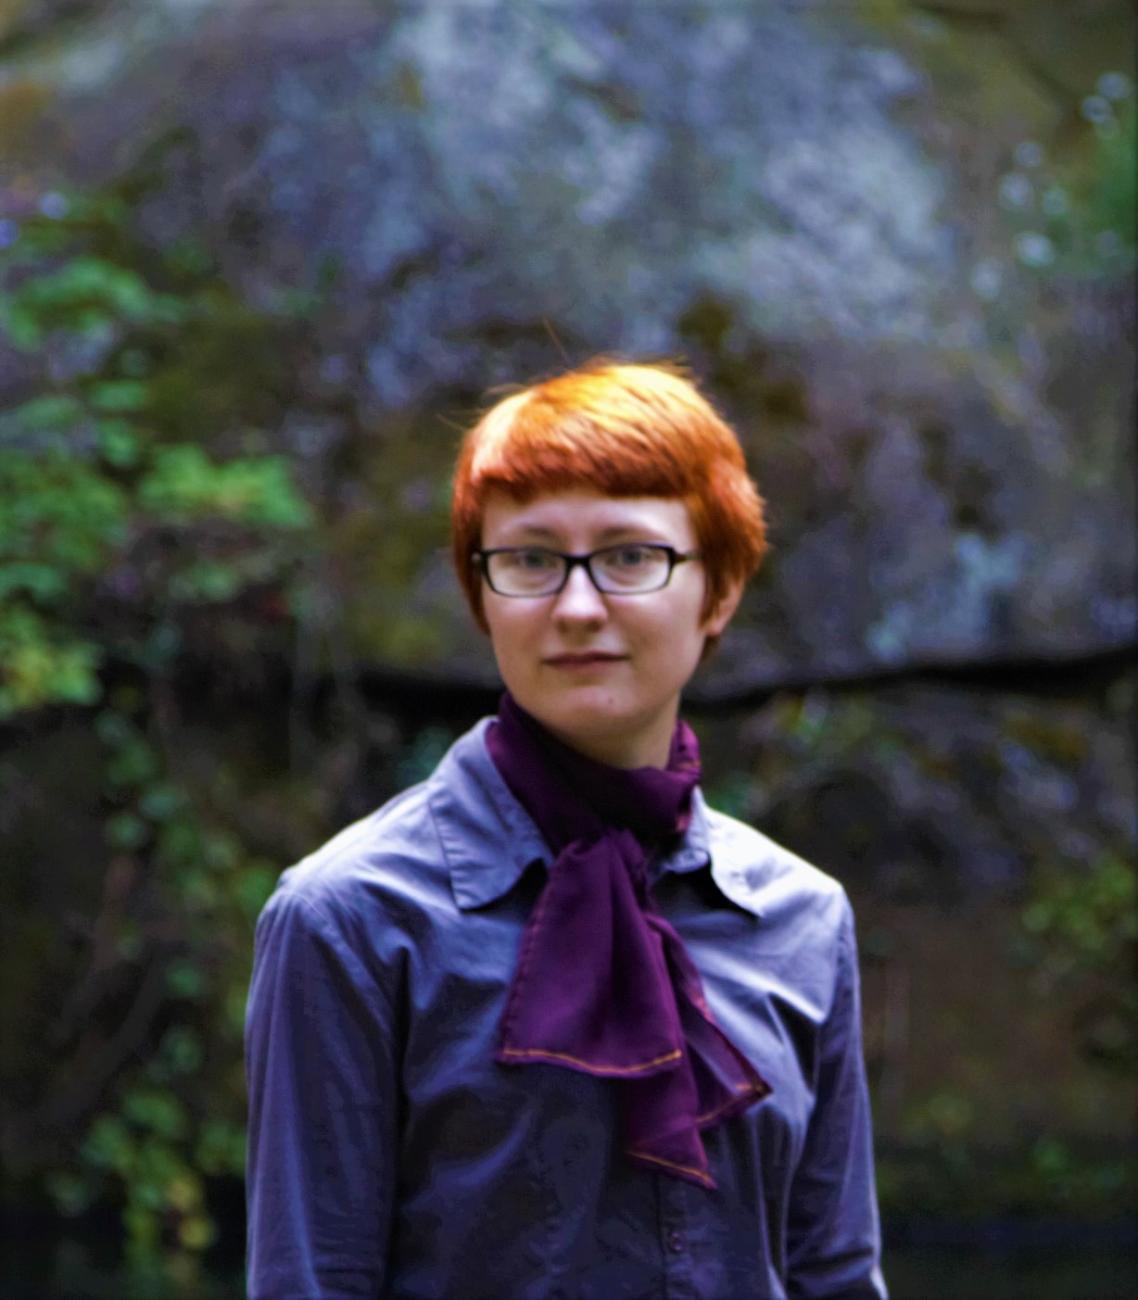 young person with short red hair and a dapper purple shirt and scarf